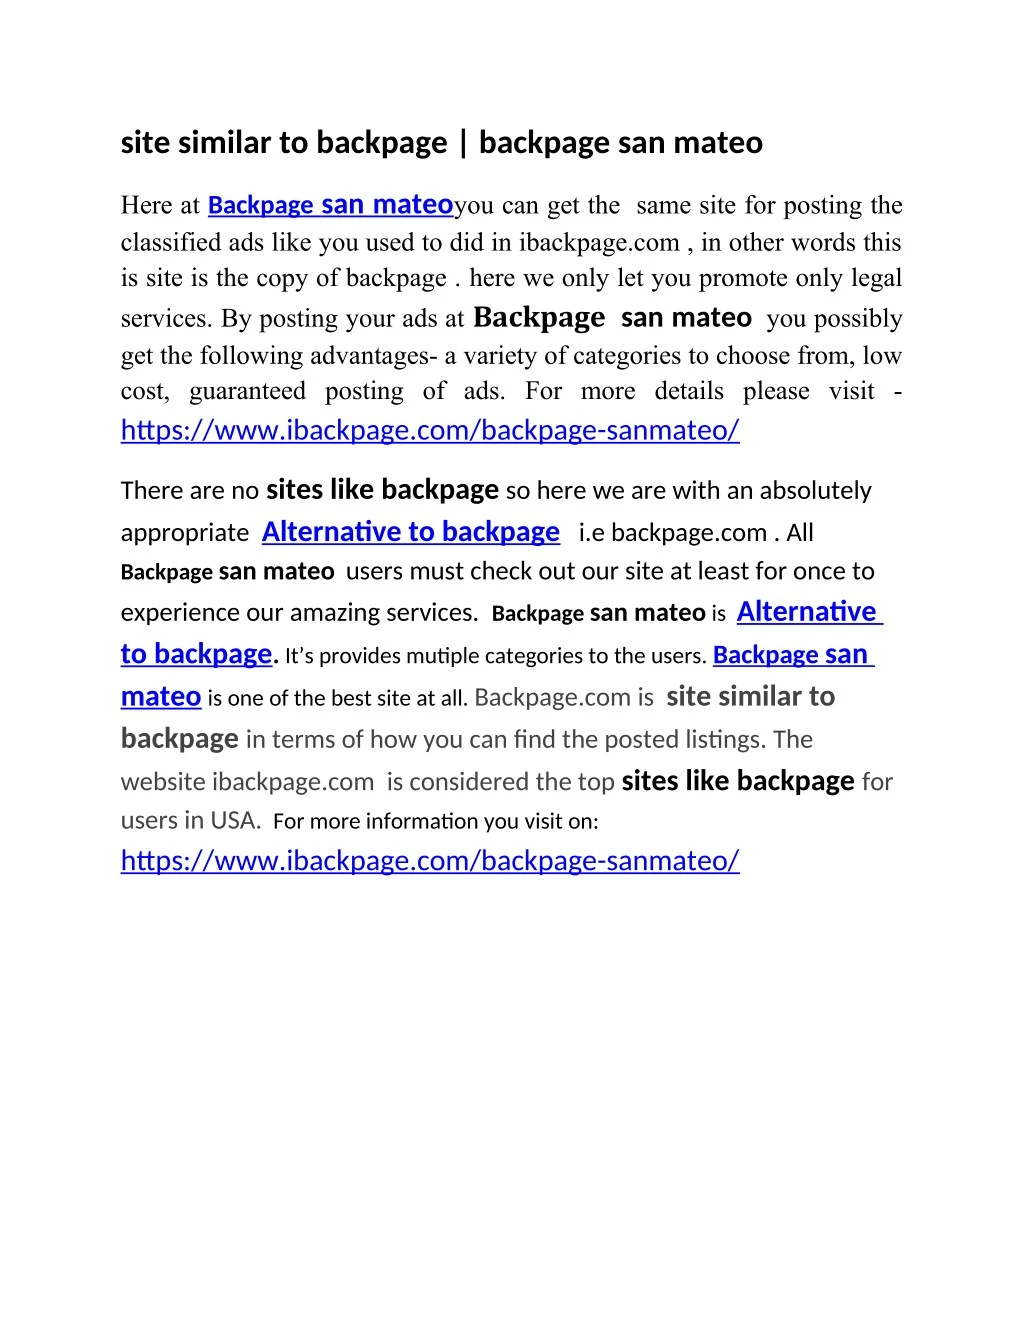 site similar to backpage backpage san mateo